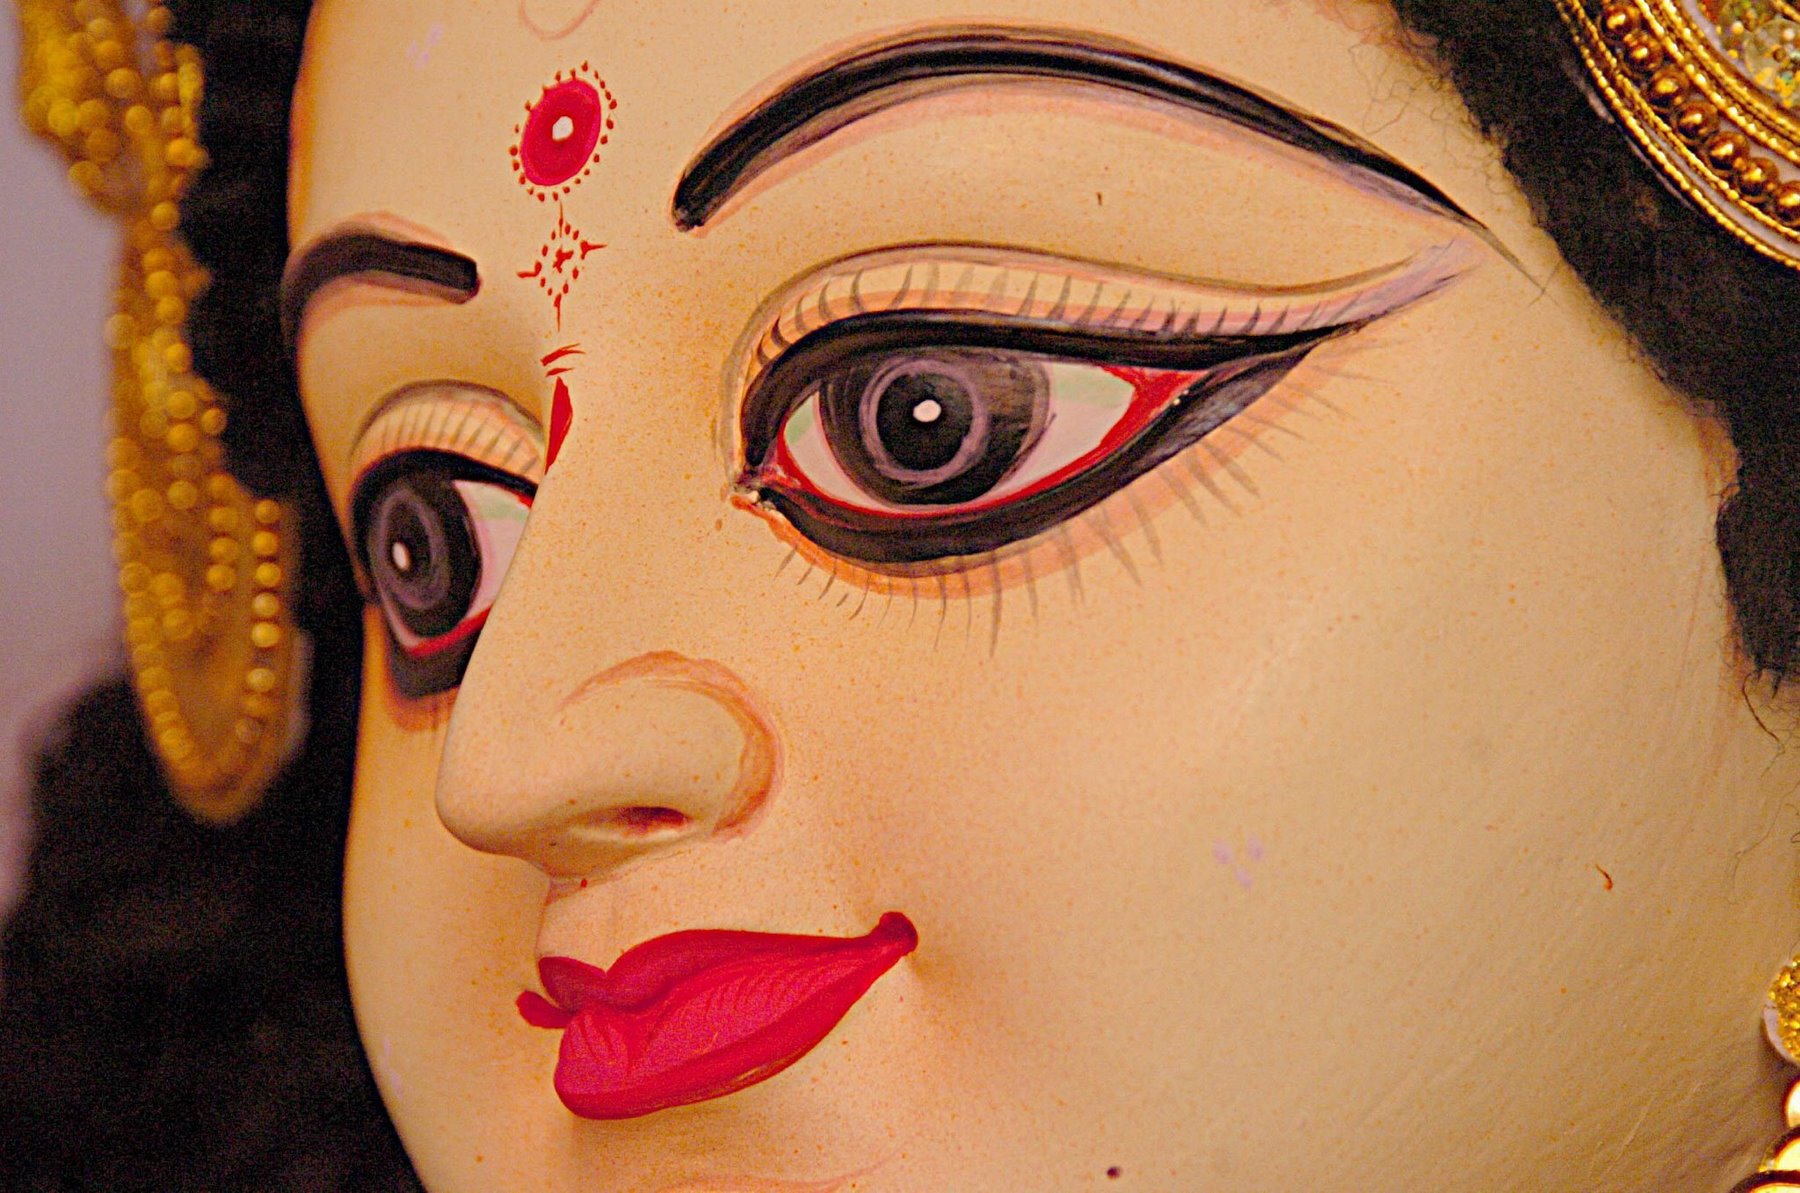 A portait  of the Goddes Durga at Ramna Kali Mandir in Dhaka, Monday, 18 October 2004. Durga Puja, the largest Hindu religious festival, begins Tuesday 19 October 2004, across the country.  EPA/Mufty Munir